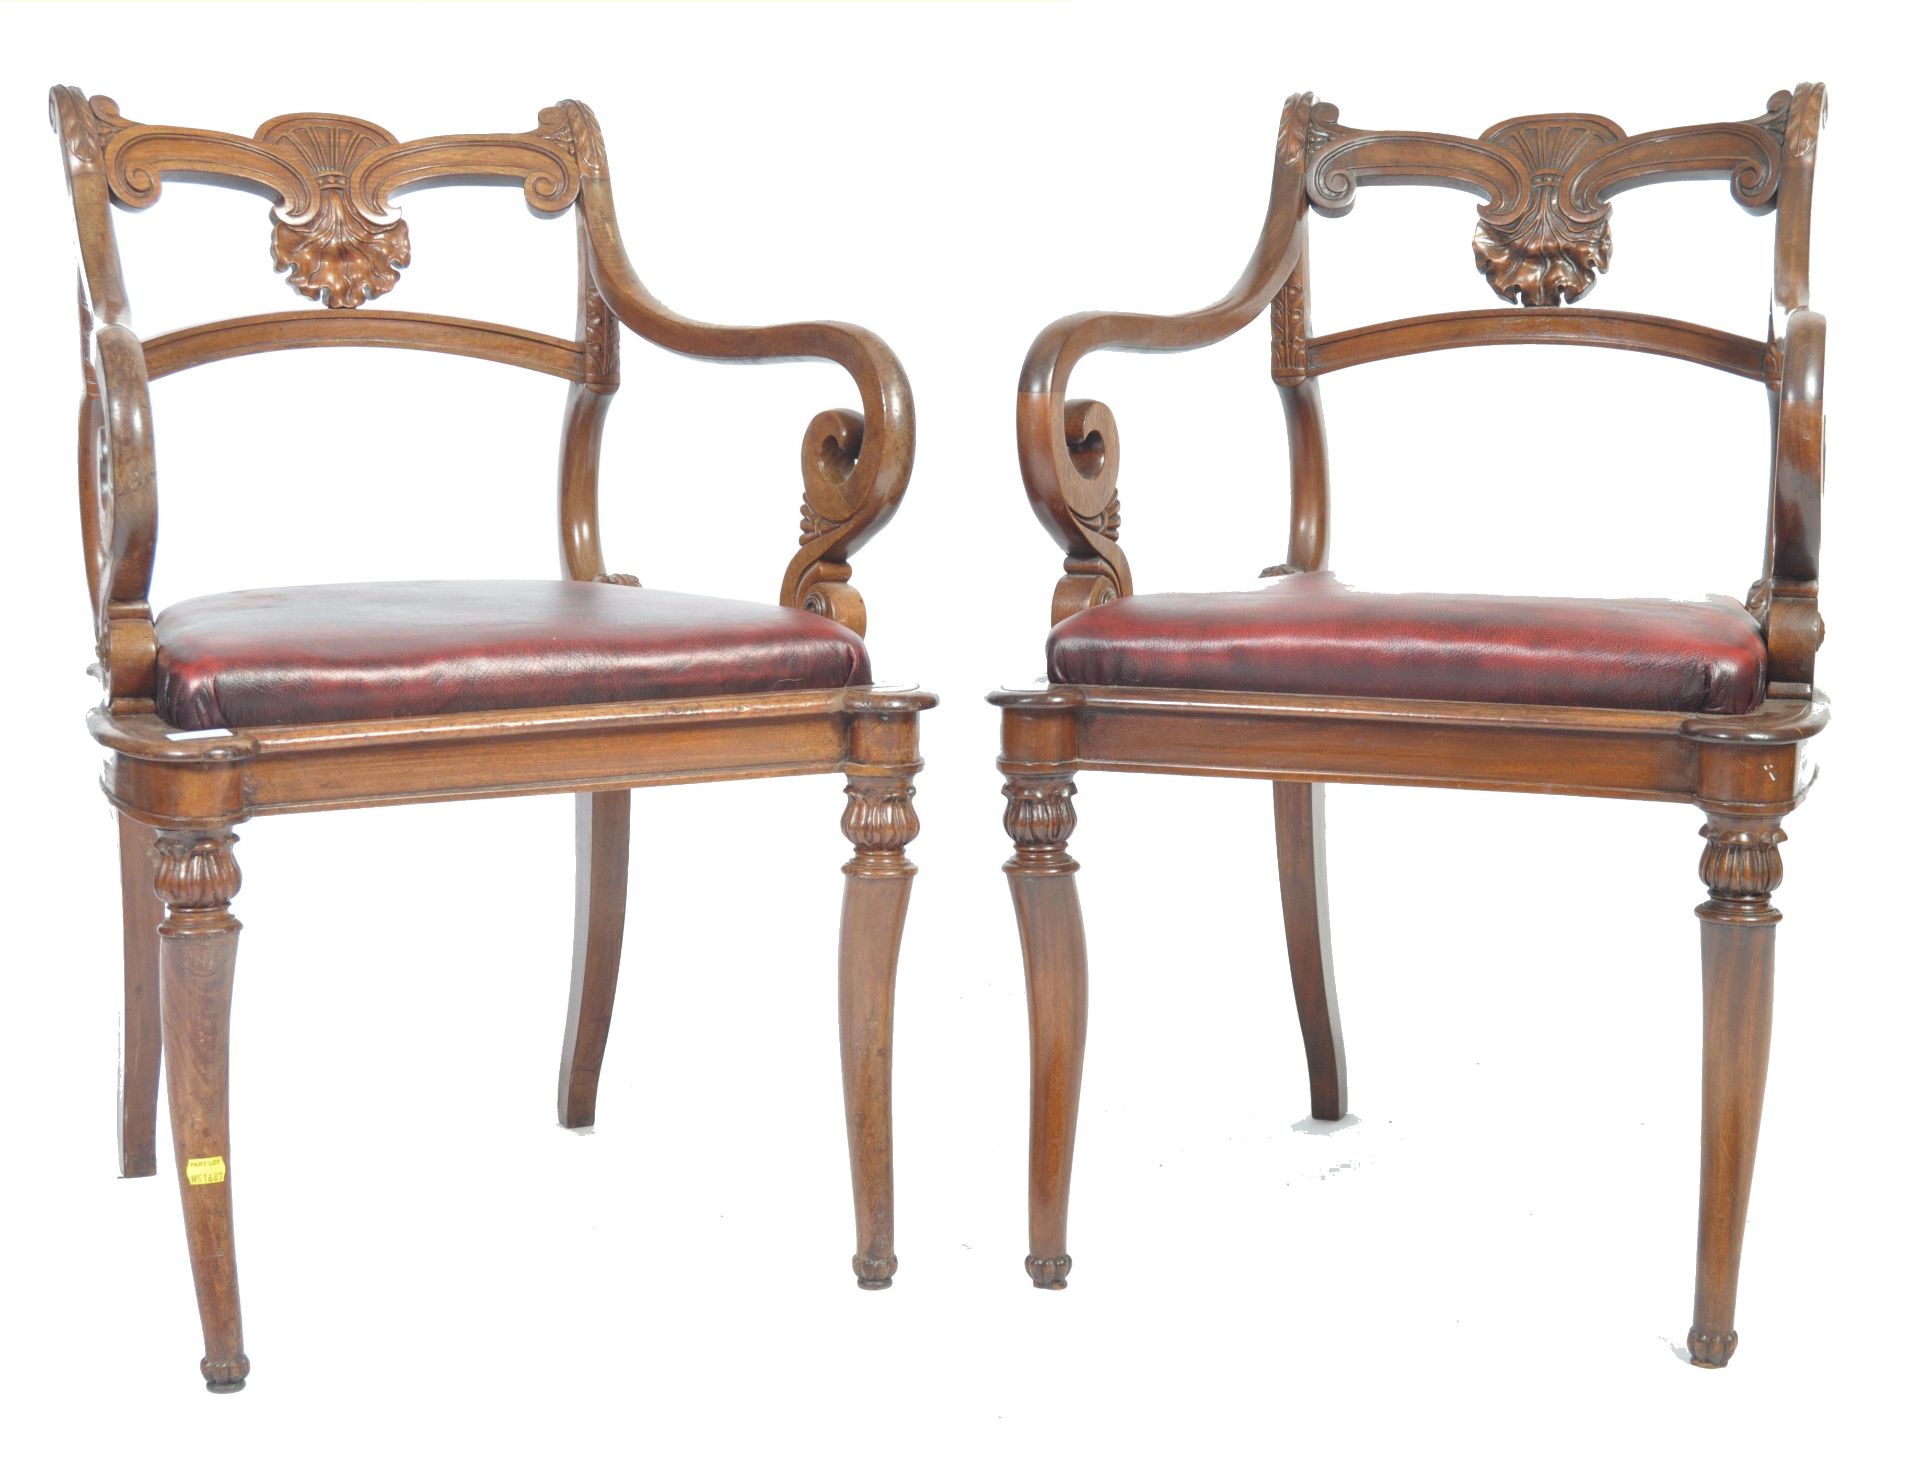 PAIR OF EARLY 19TH CENTURY ANGLO-INDIAN ROSEWOOD ARMCHAIRS